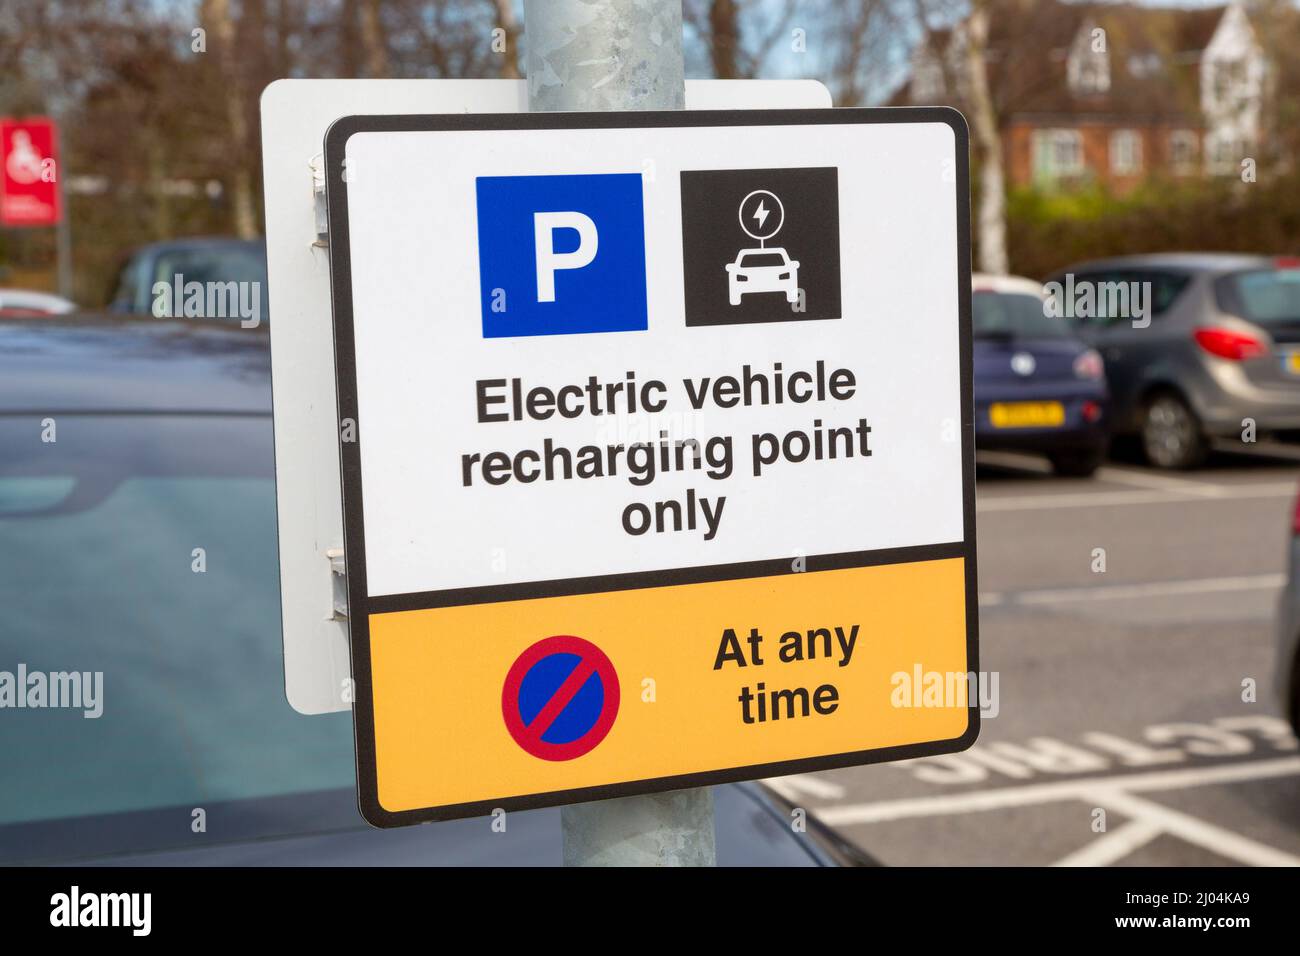 Electric vehicle charging point sign, electric car charging parking only, kent, uk Stock Photo